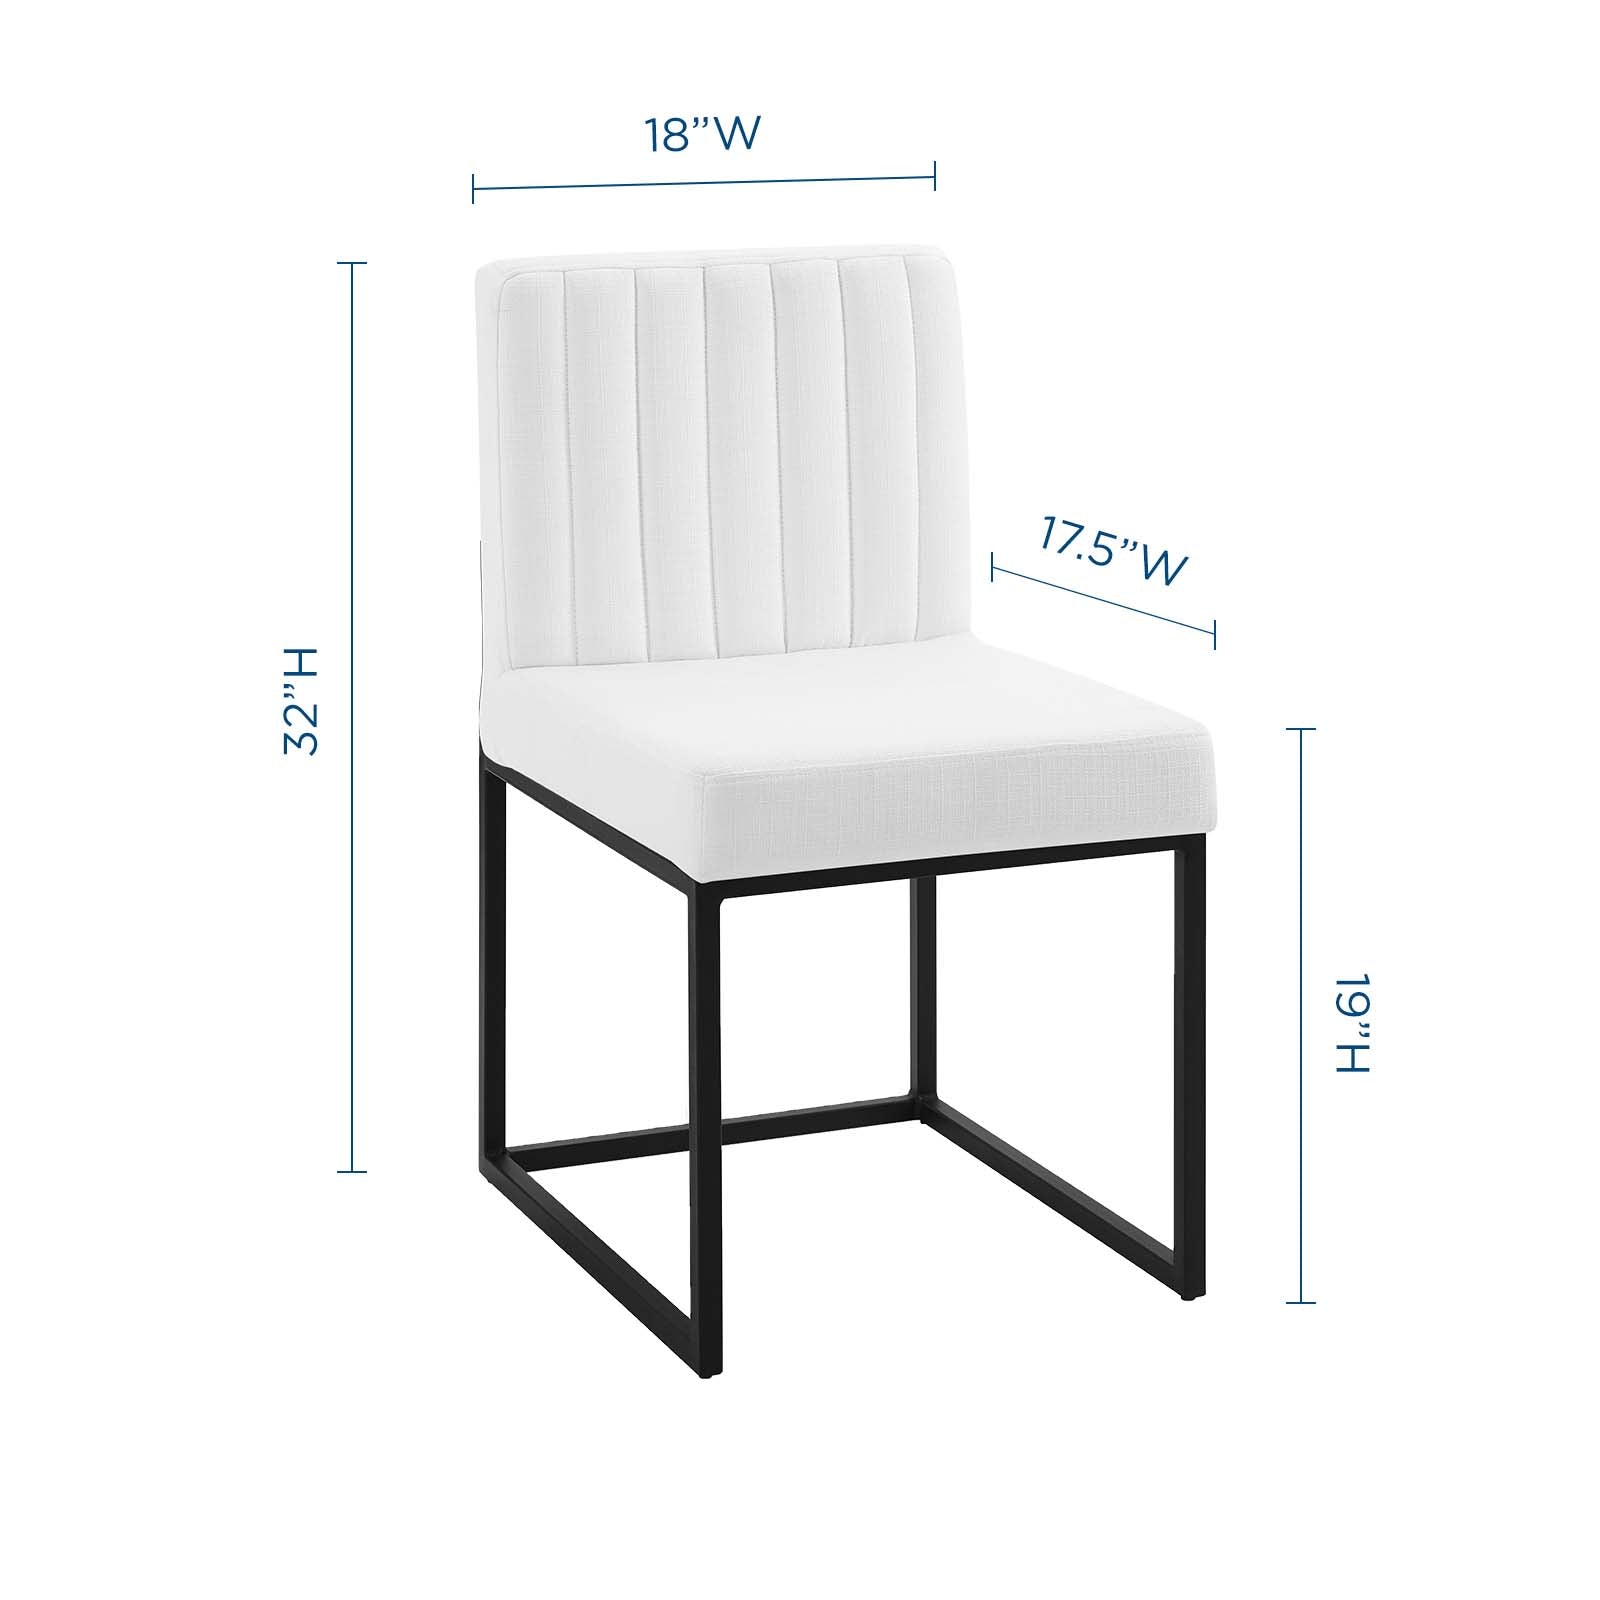 Modway Dining Chairs - Carriage Dining Chair Upholstered Fabric Set of 2 Black White